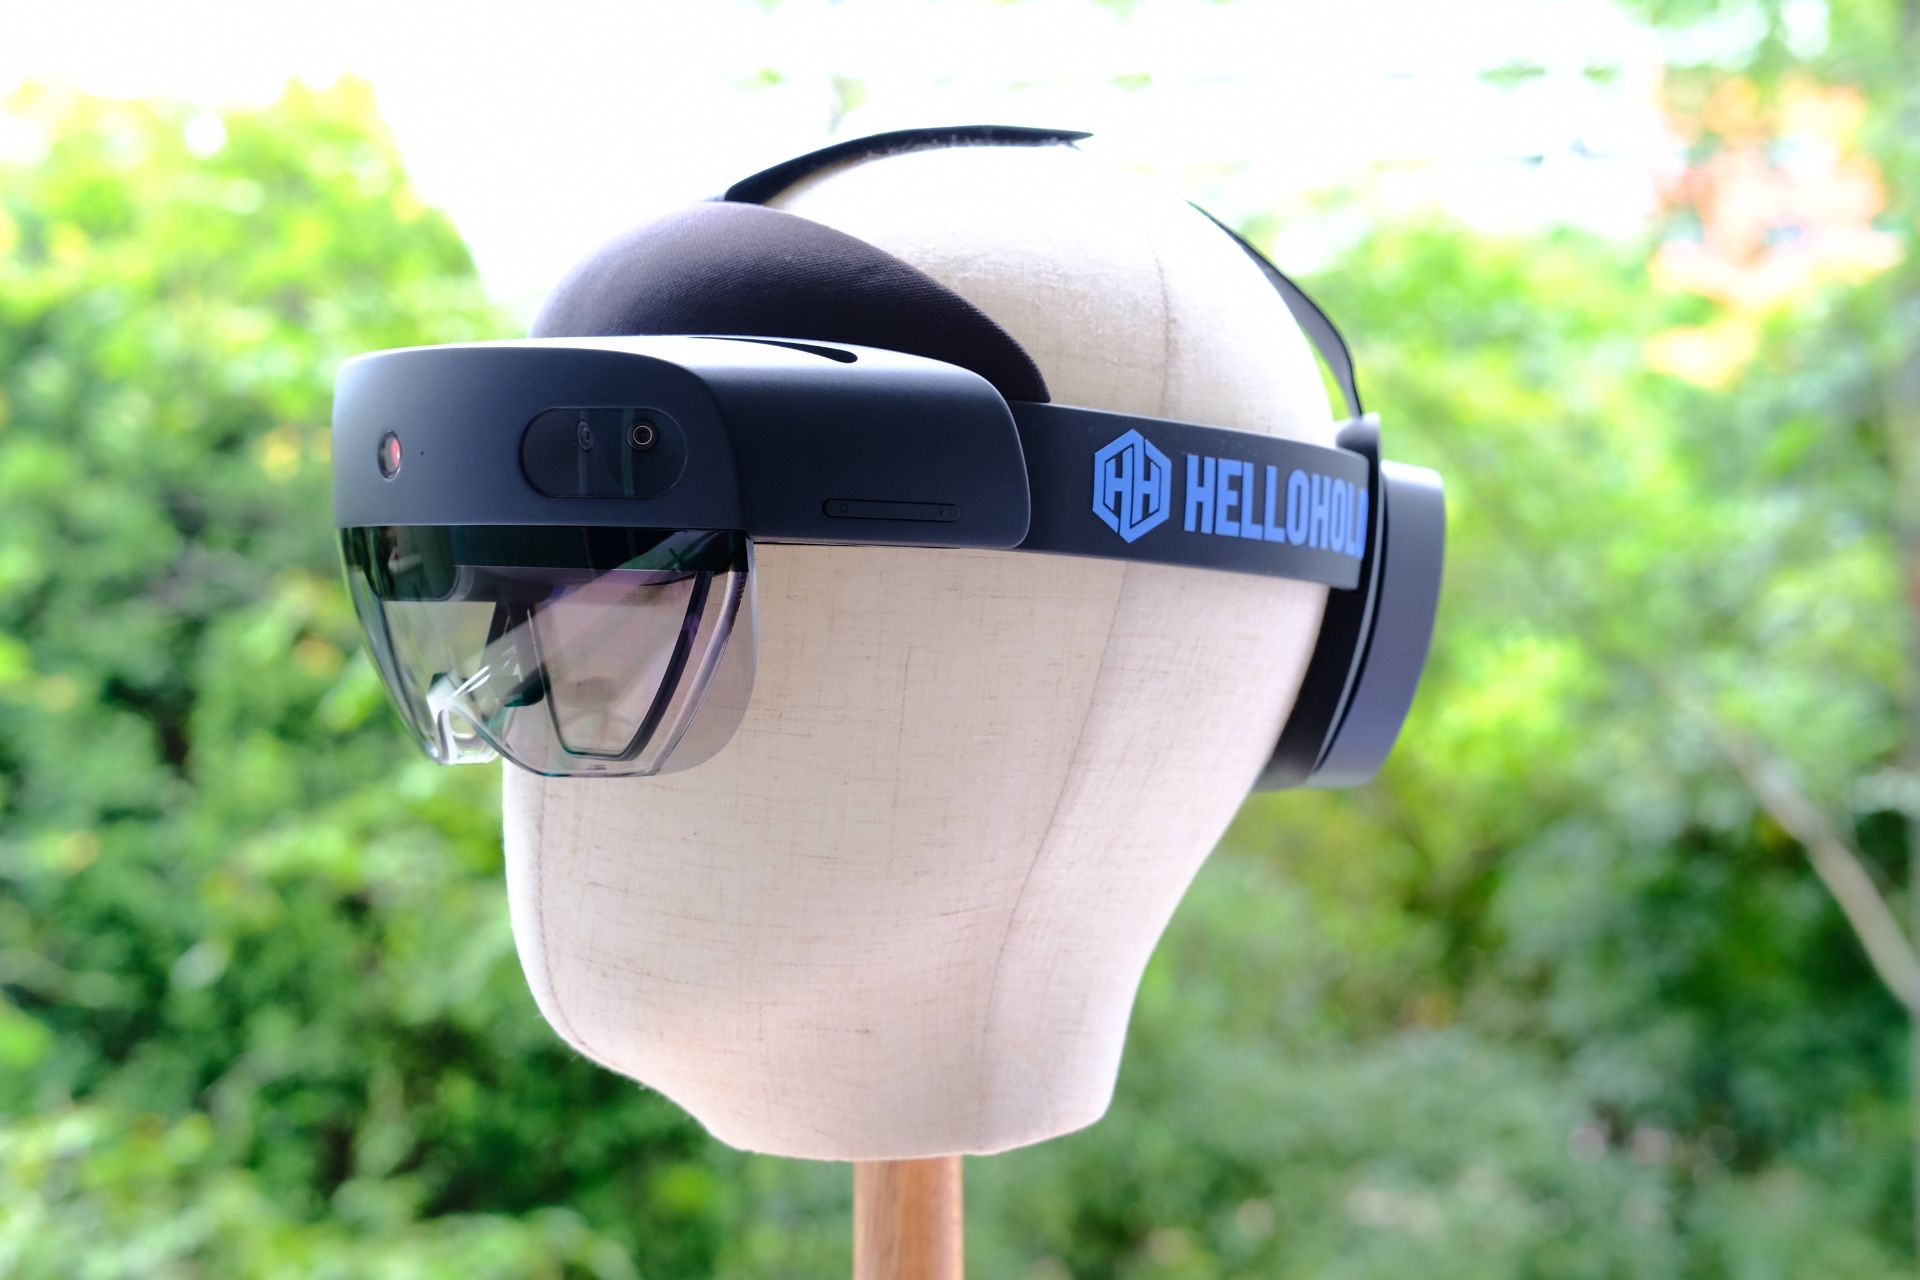 When Will HoloLens Be Available To The Public